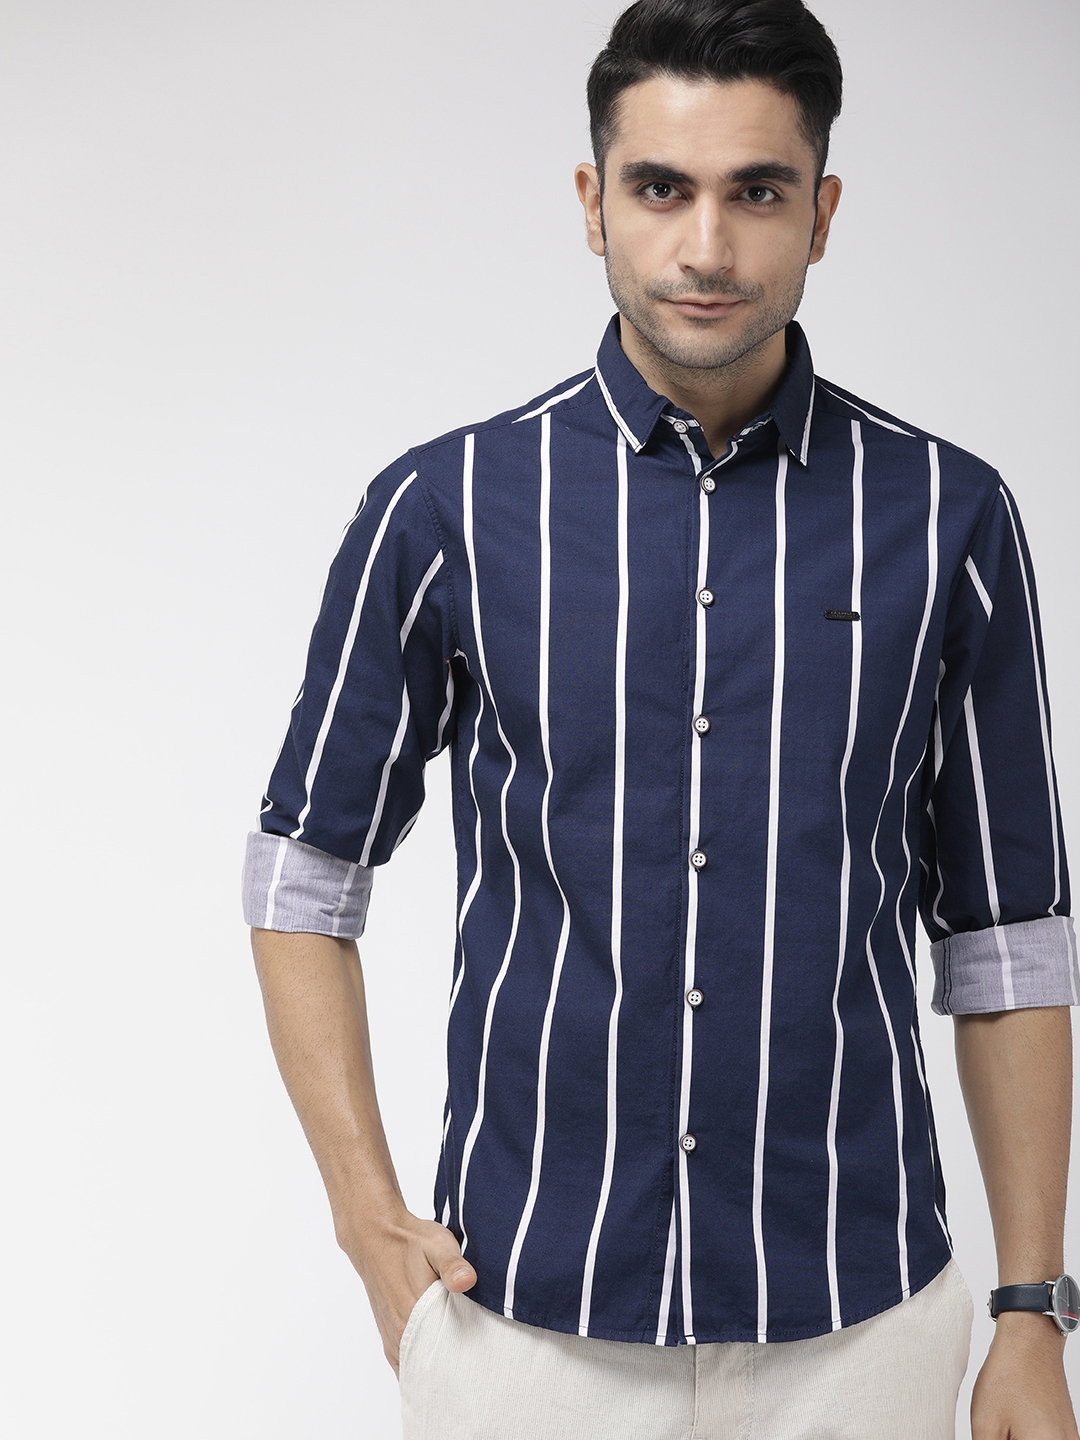 Buy The Indian Garage Co Men Navy Blue & White Slim Fit Striped Casual ...